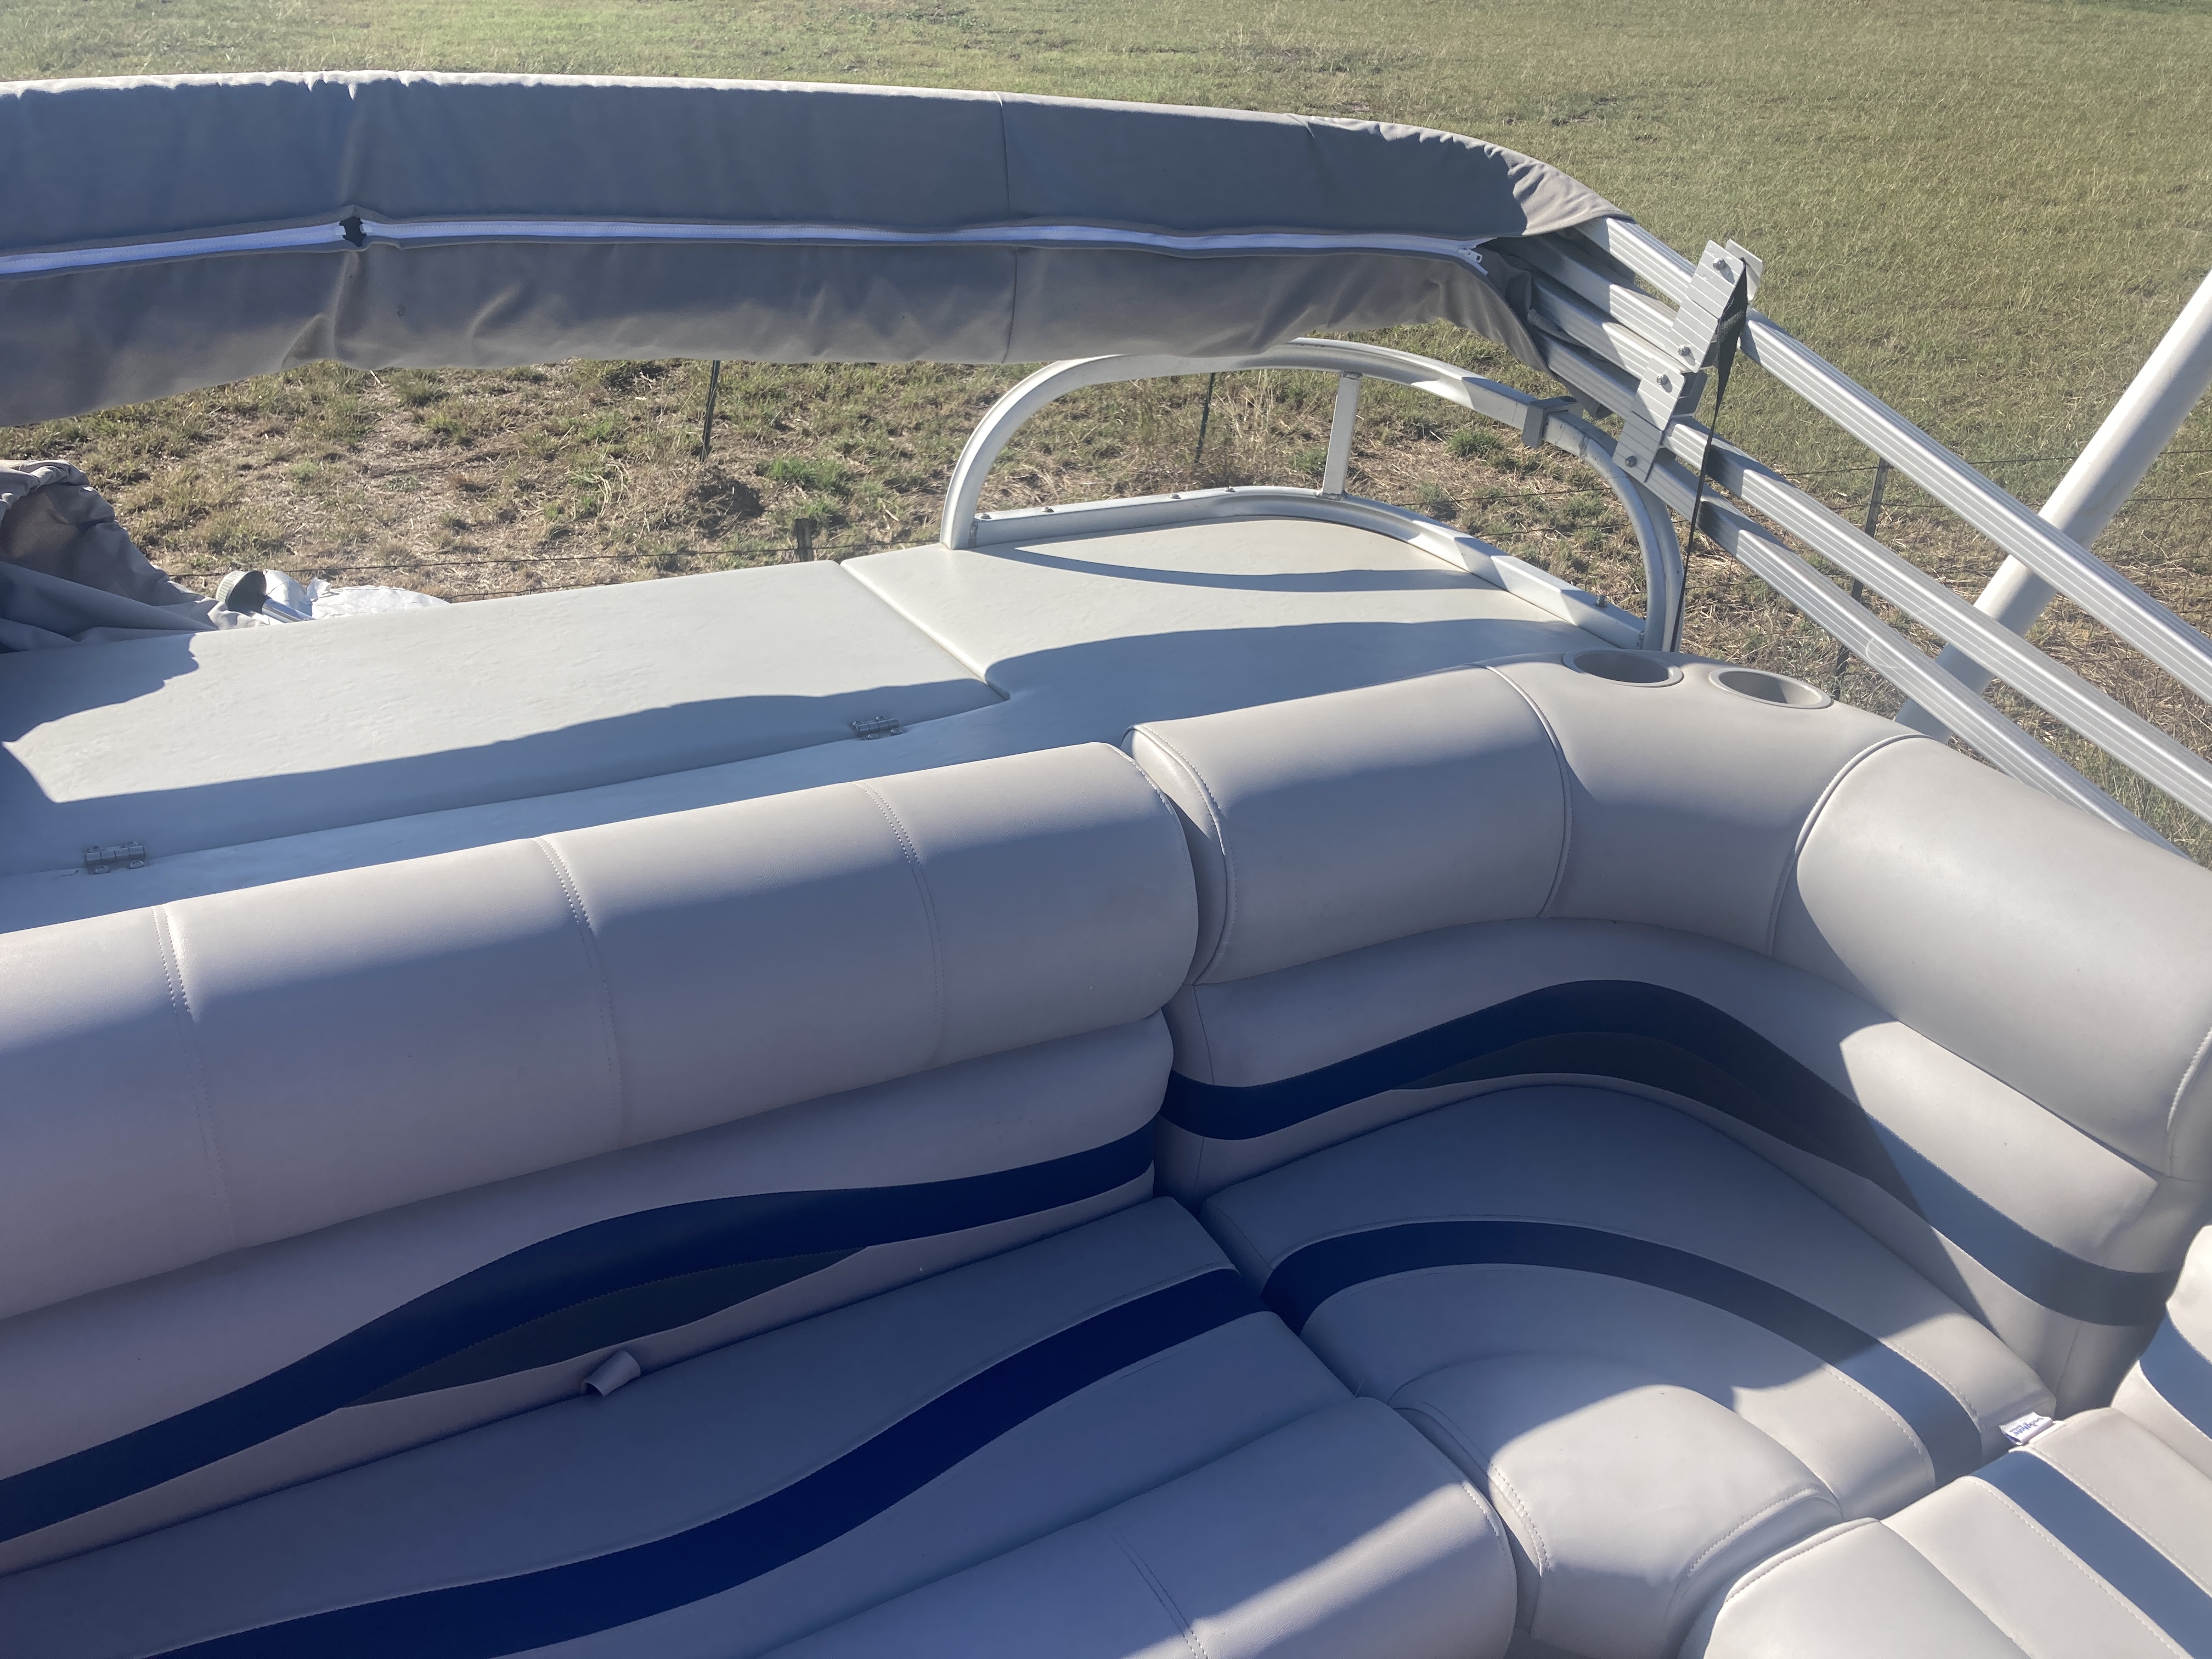 1999 24 foot Other Beachcomber Power boat for sale in Briarcliff, TX - image 13 